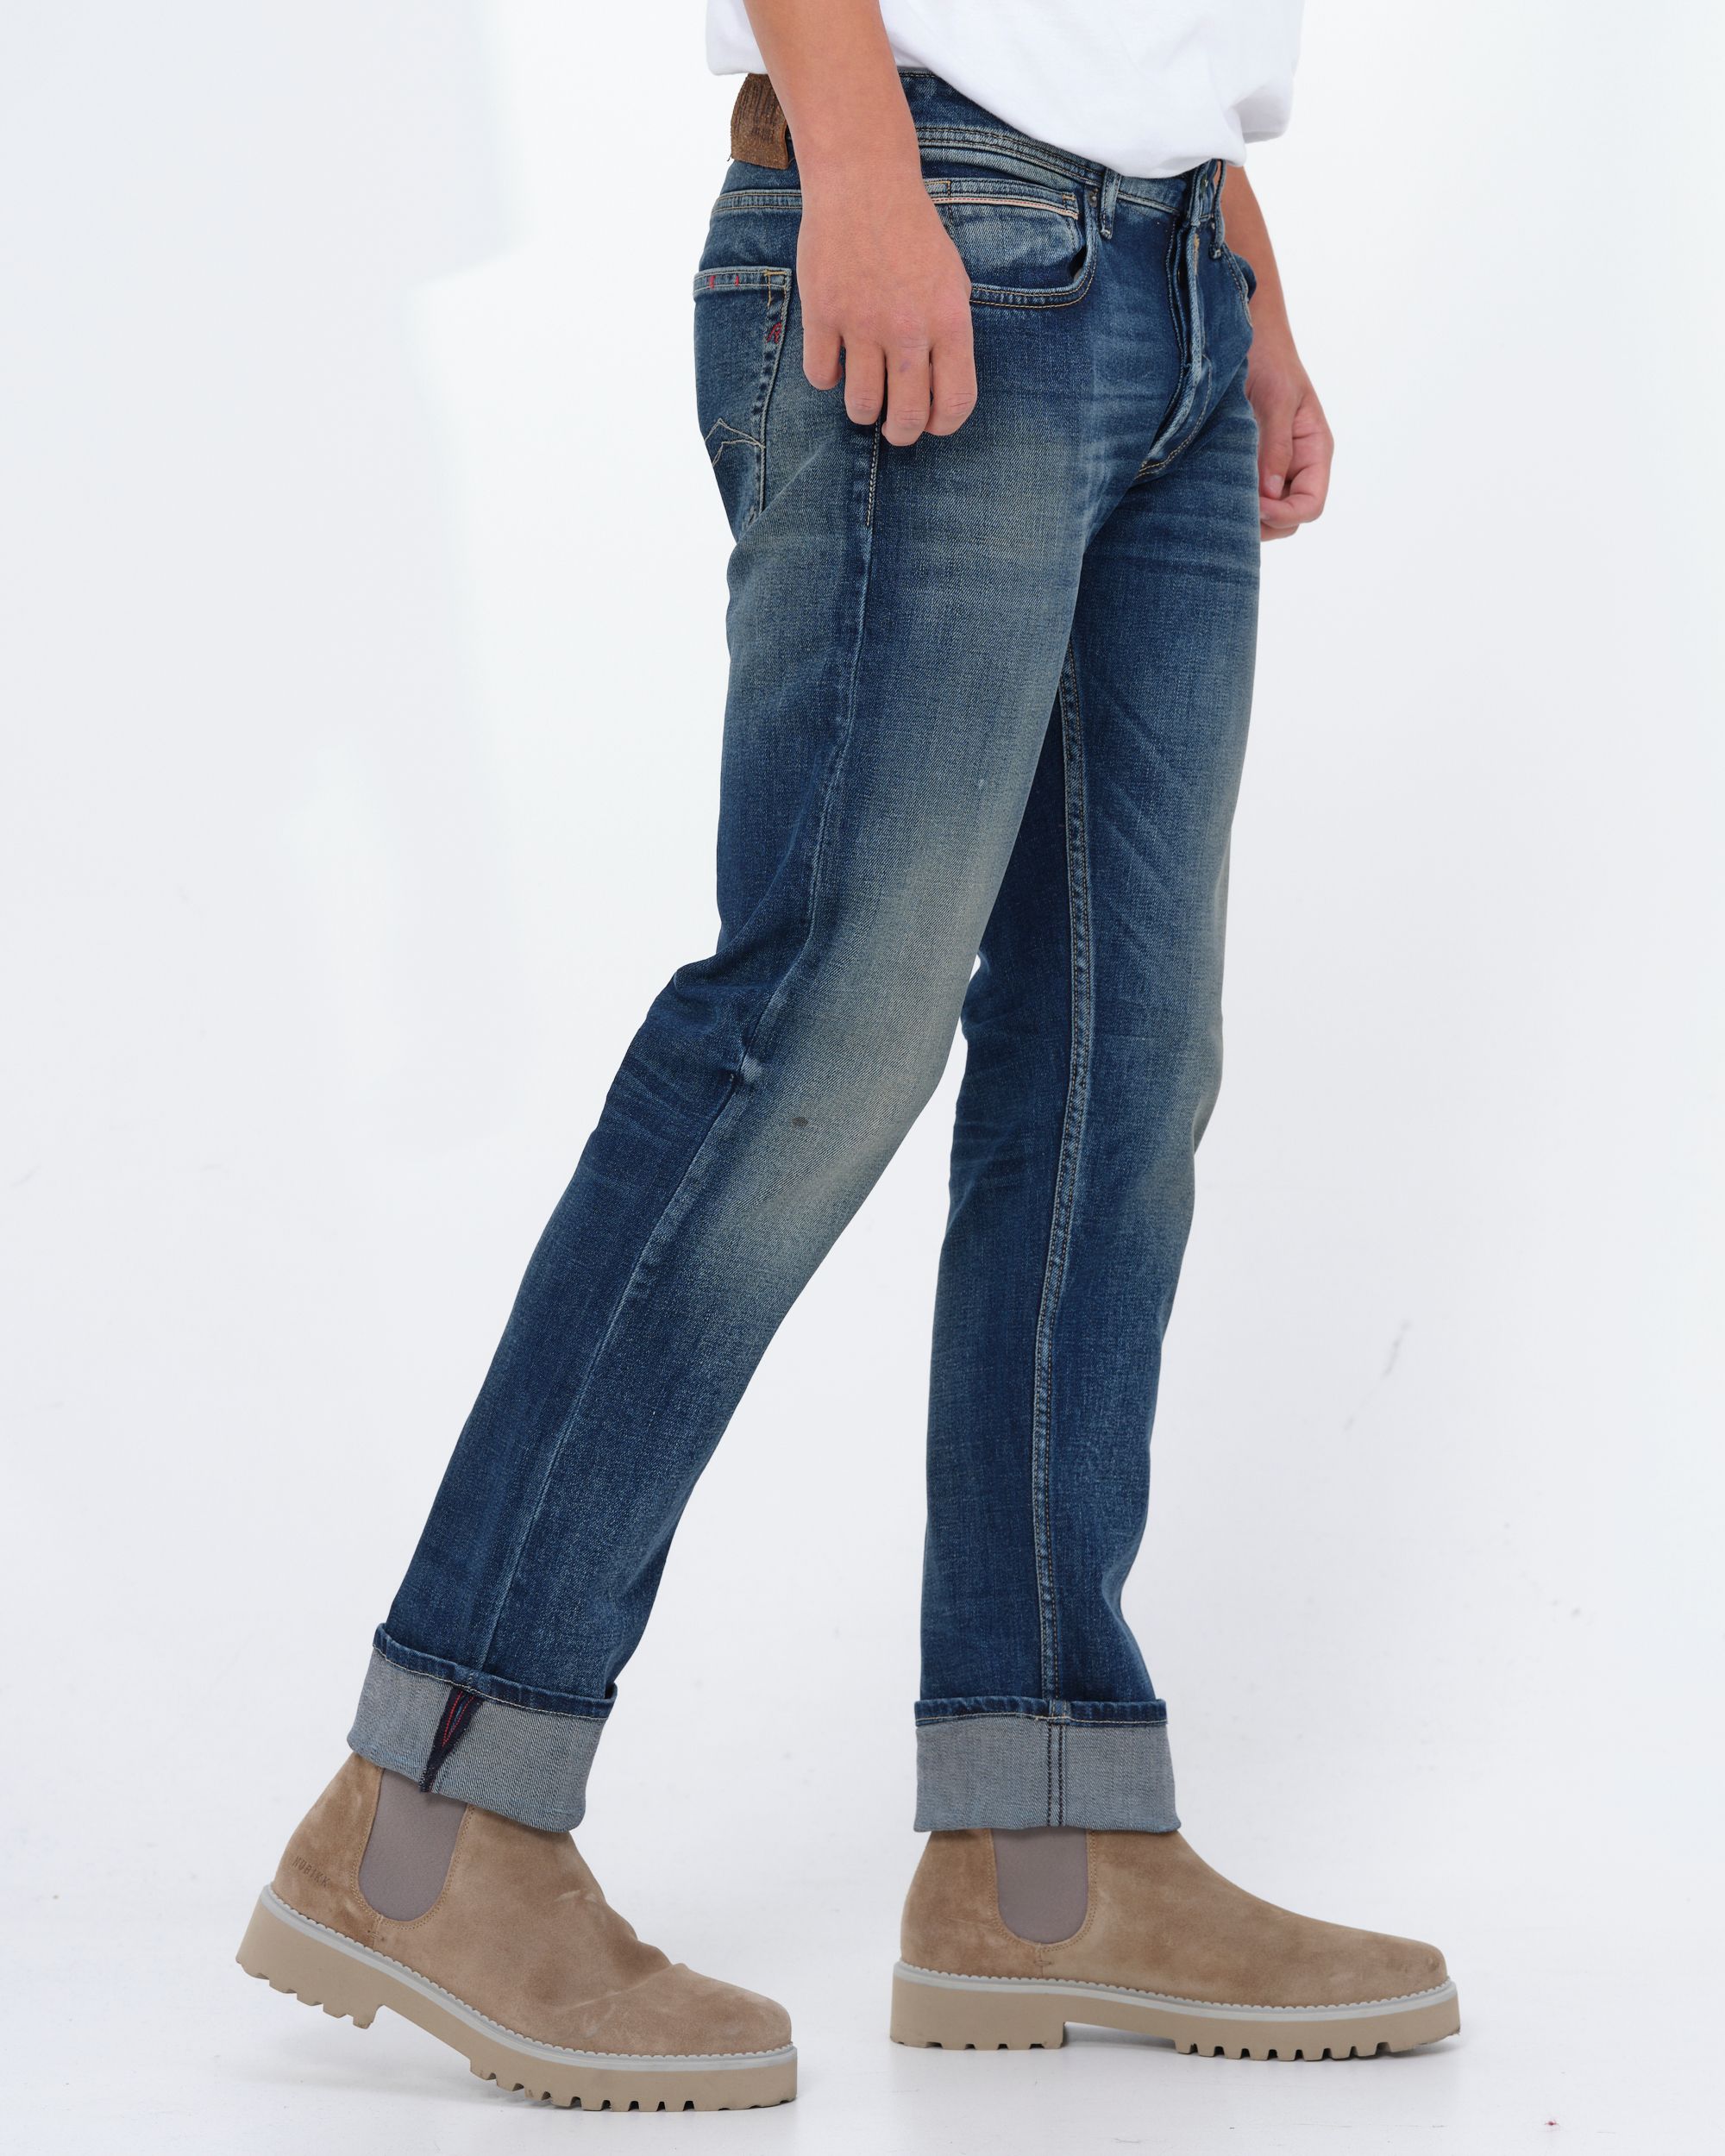 Replay Grover Jeans Blauw 081757-001-30/32